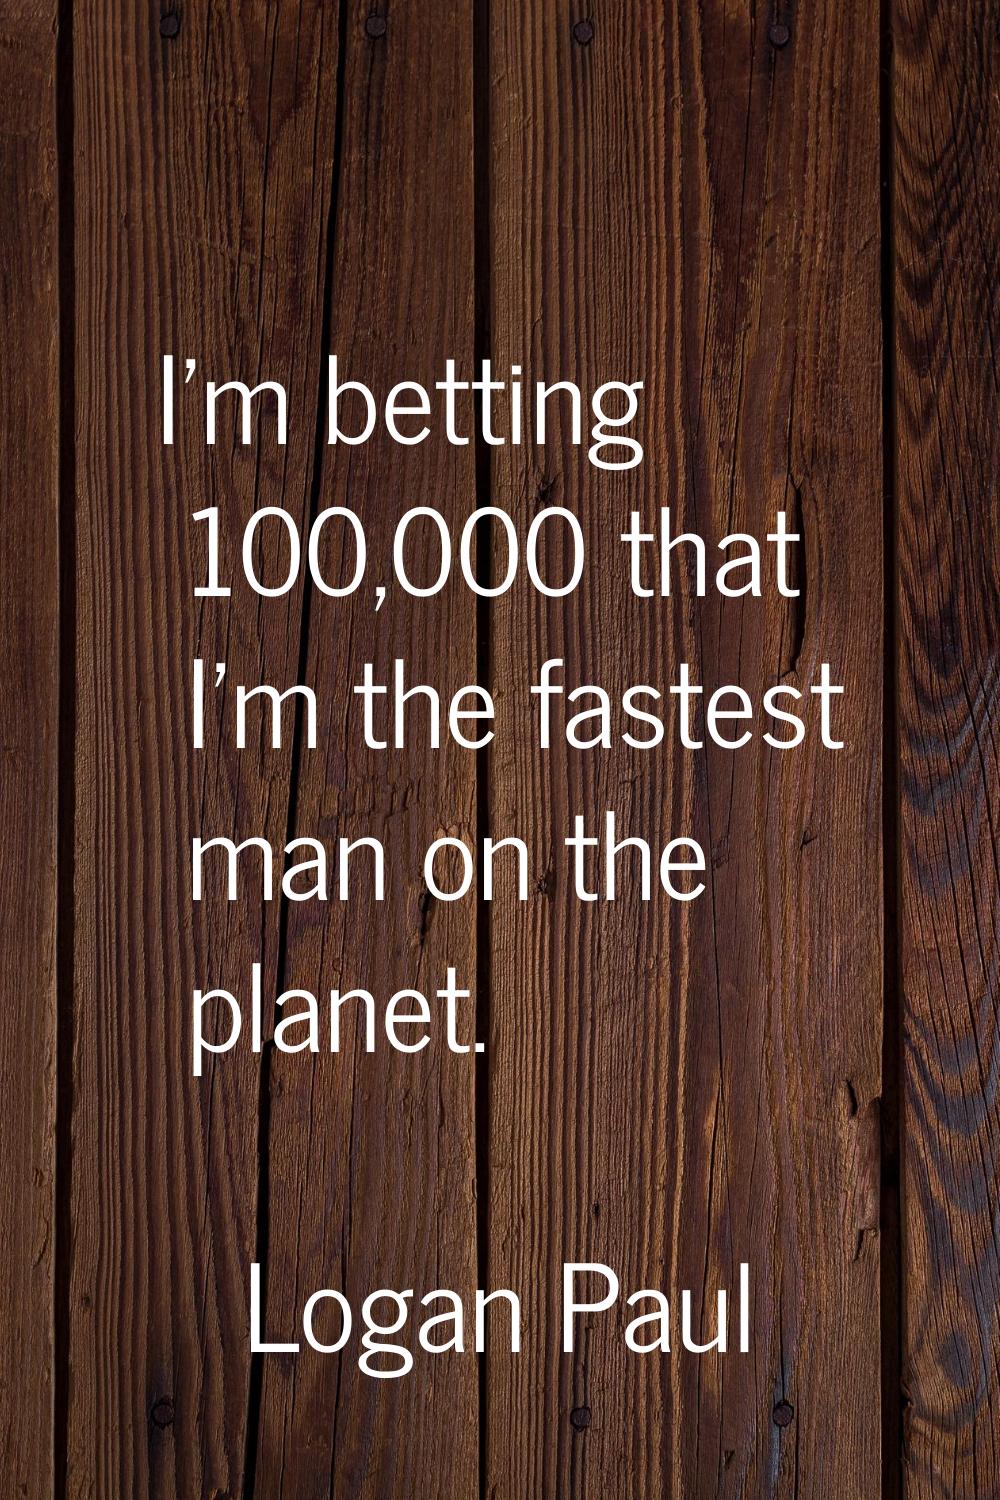 I'm betting 100,000 that I'm the fastest man on the planet.